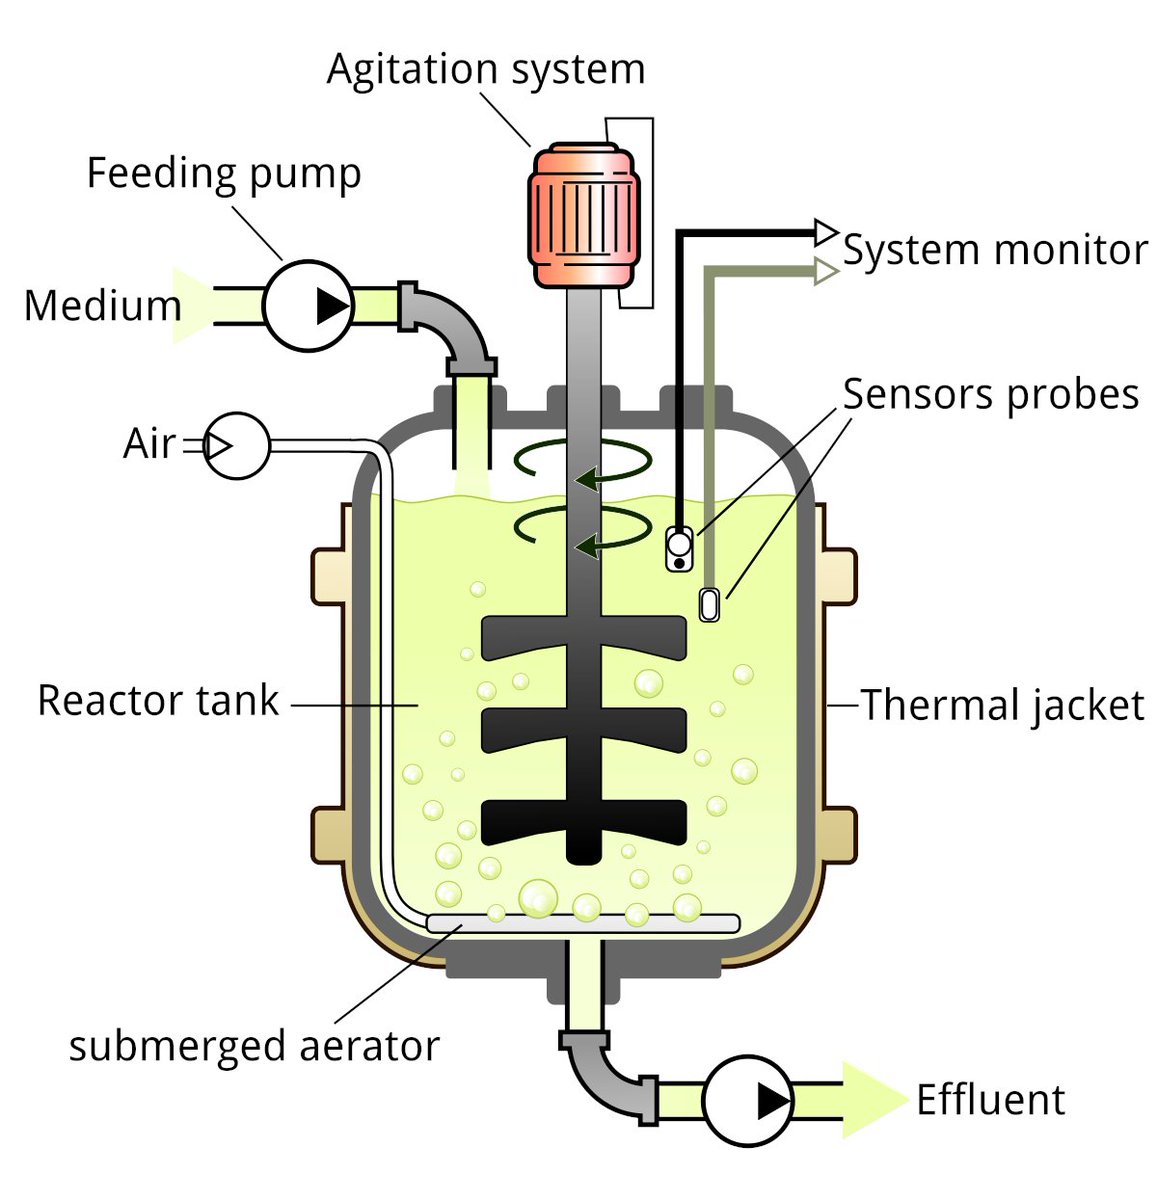 15/
Lets talk bioreactors. 

Huge vats that consume raw nutrients, and excrete purified insulin, biofuels, antibiotics, pharmaceuticals, meat, dairy.

Programmable cells are each a tiny factory, millions of times more efficient.

Using less land, energy, and water.